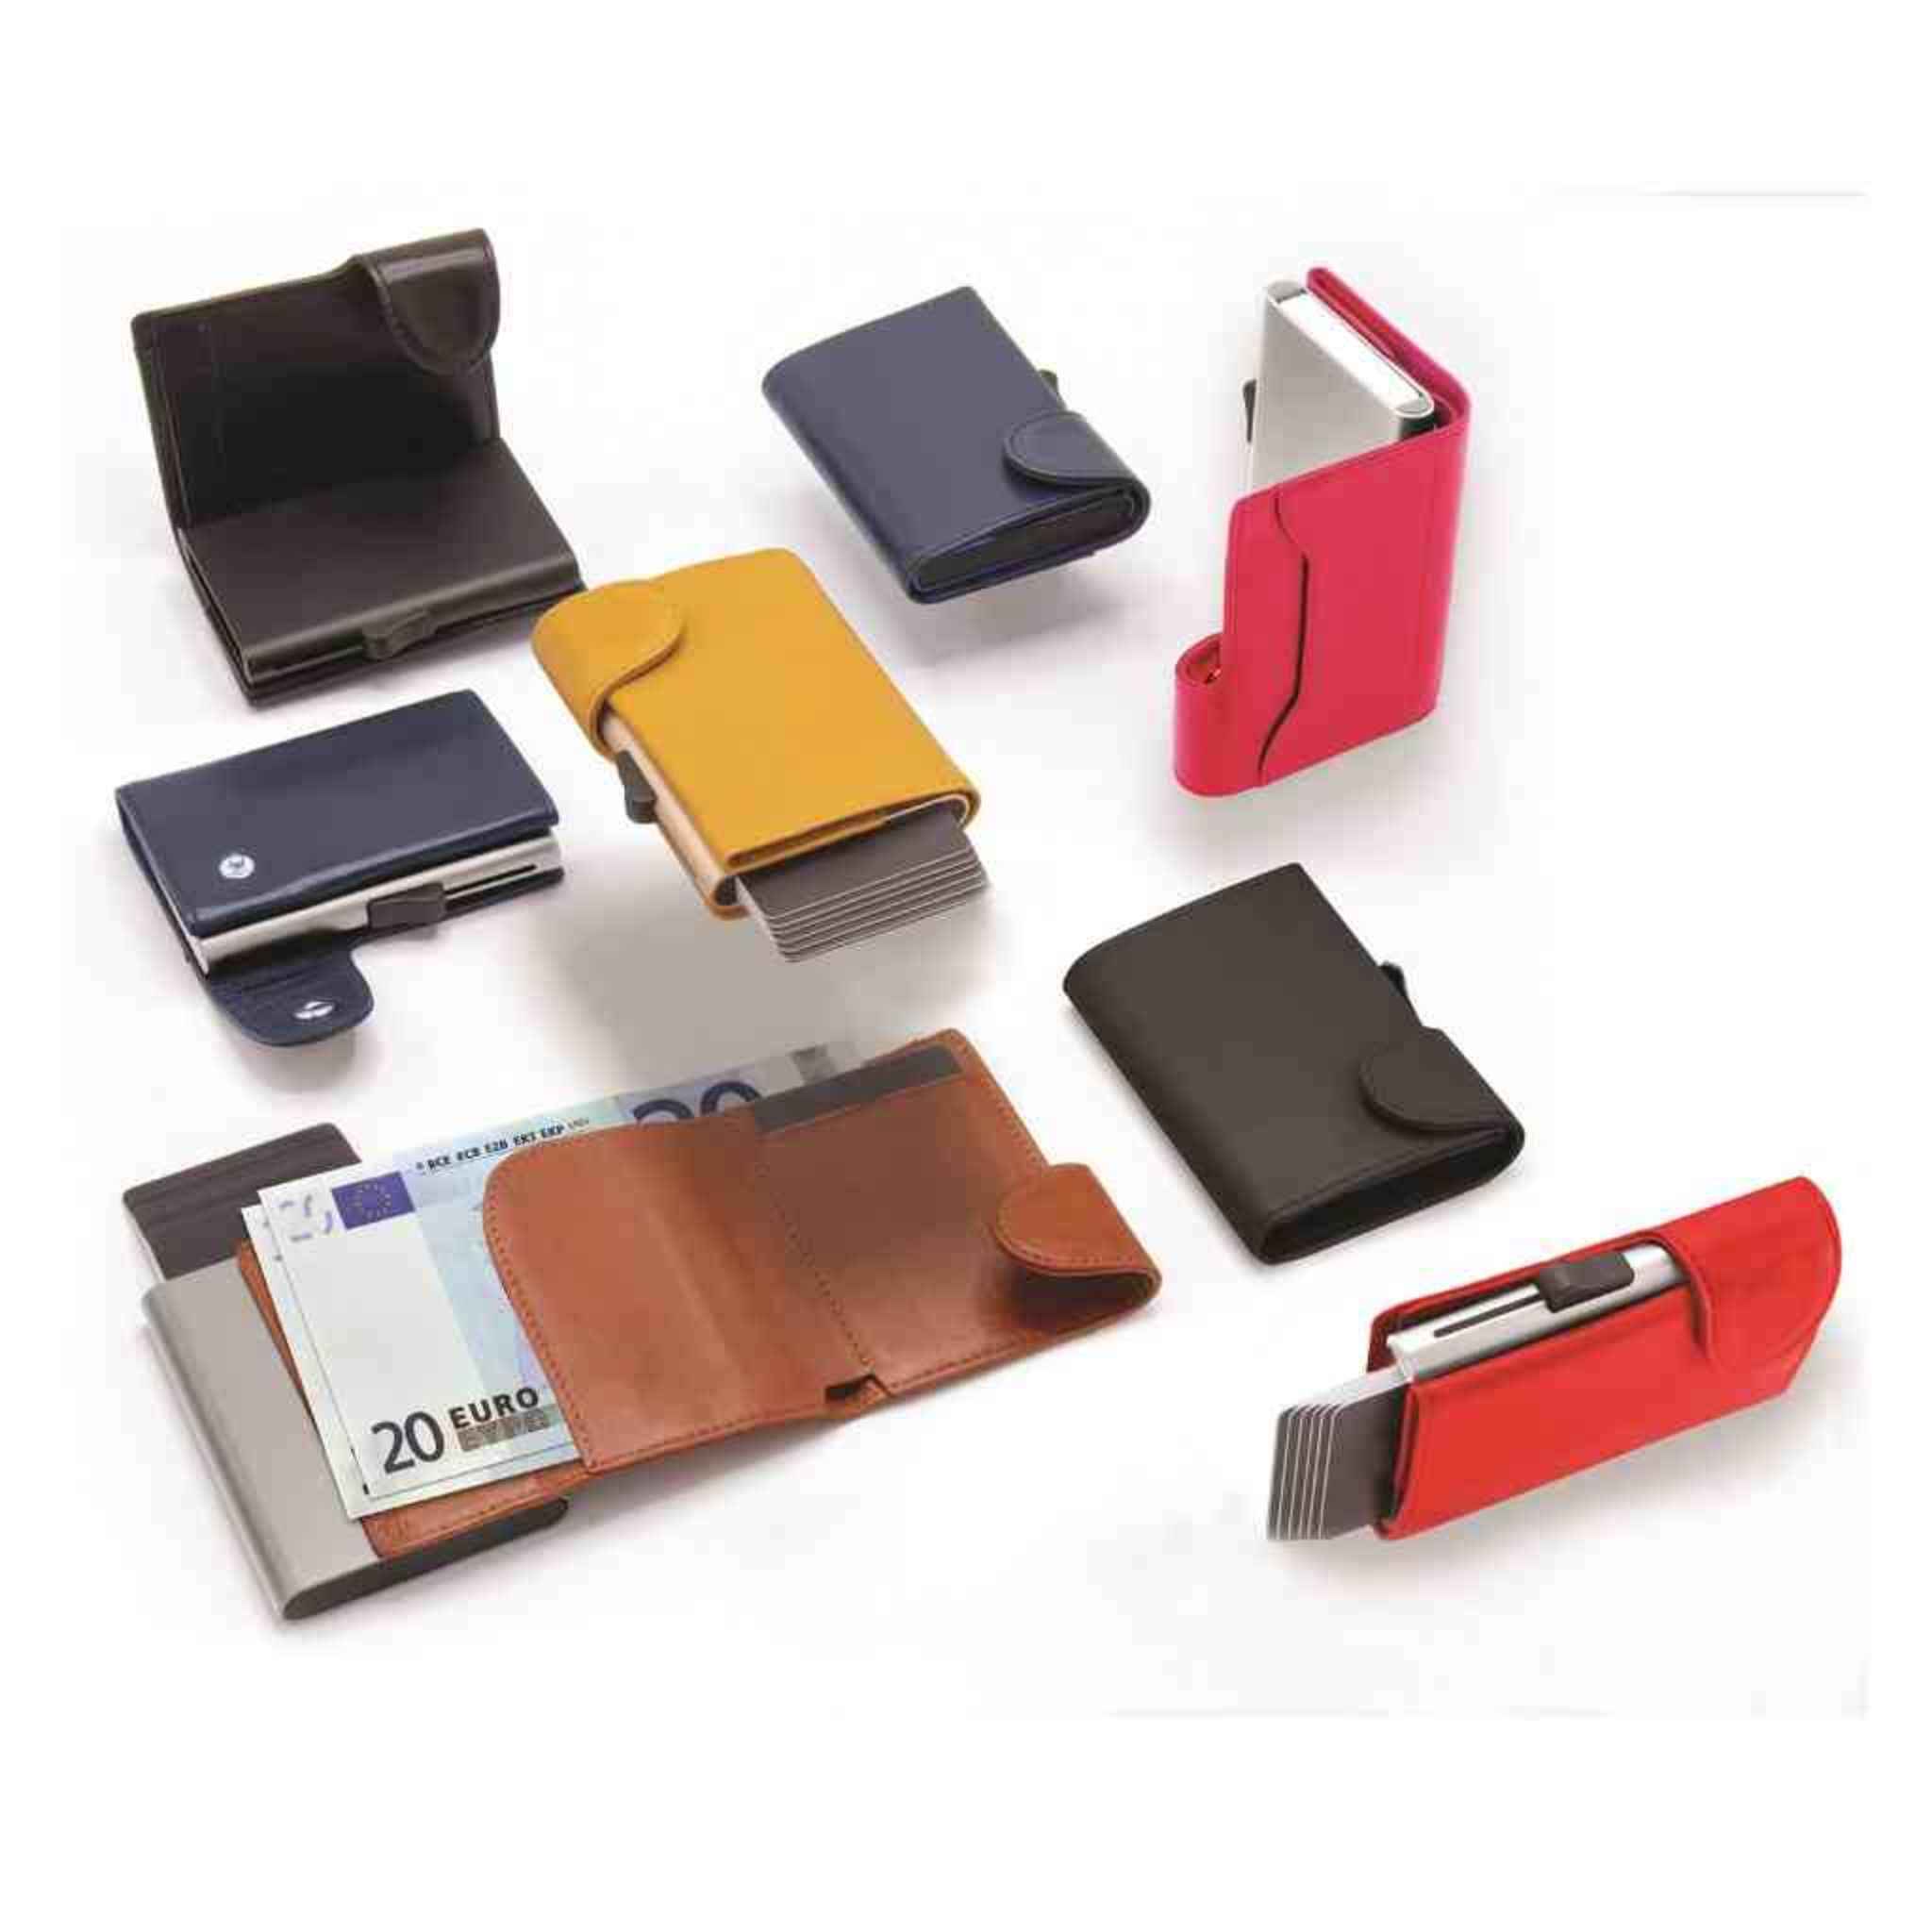 Card holder and wallet with some cards sticking out